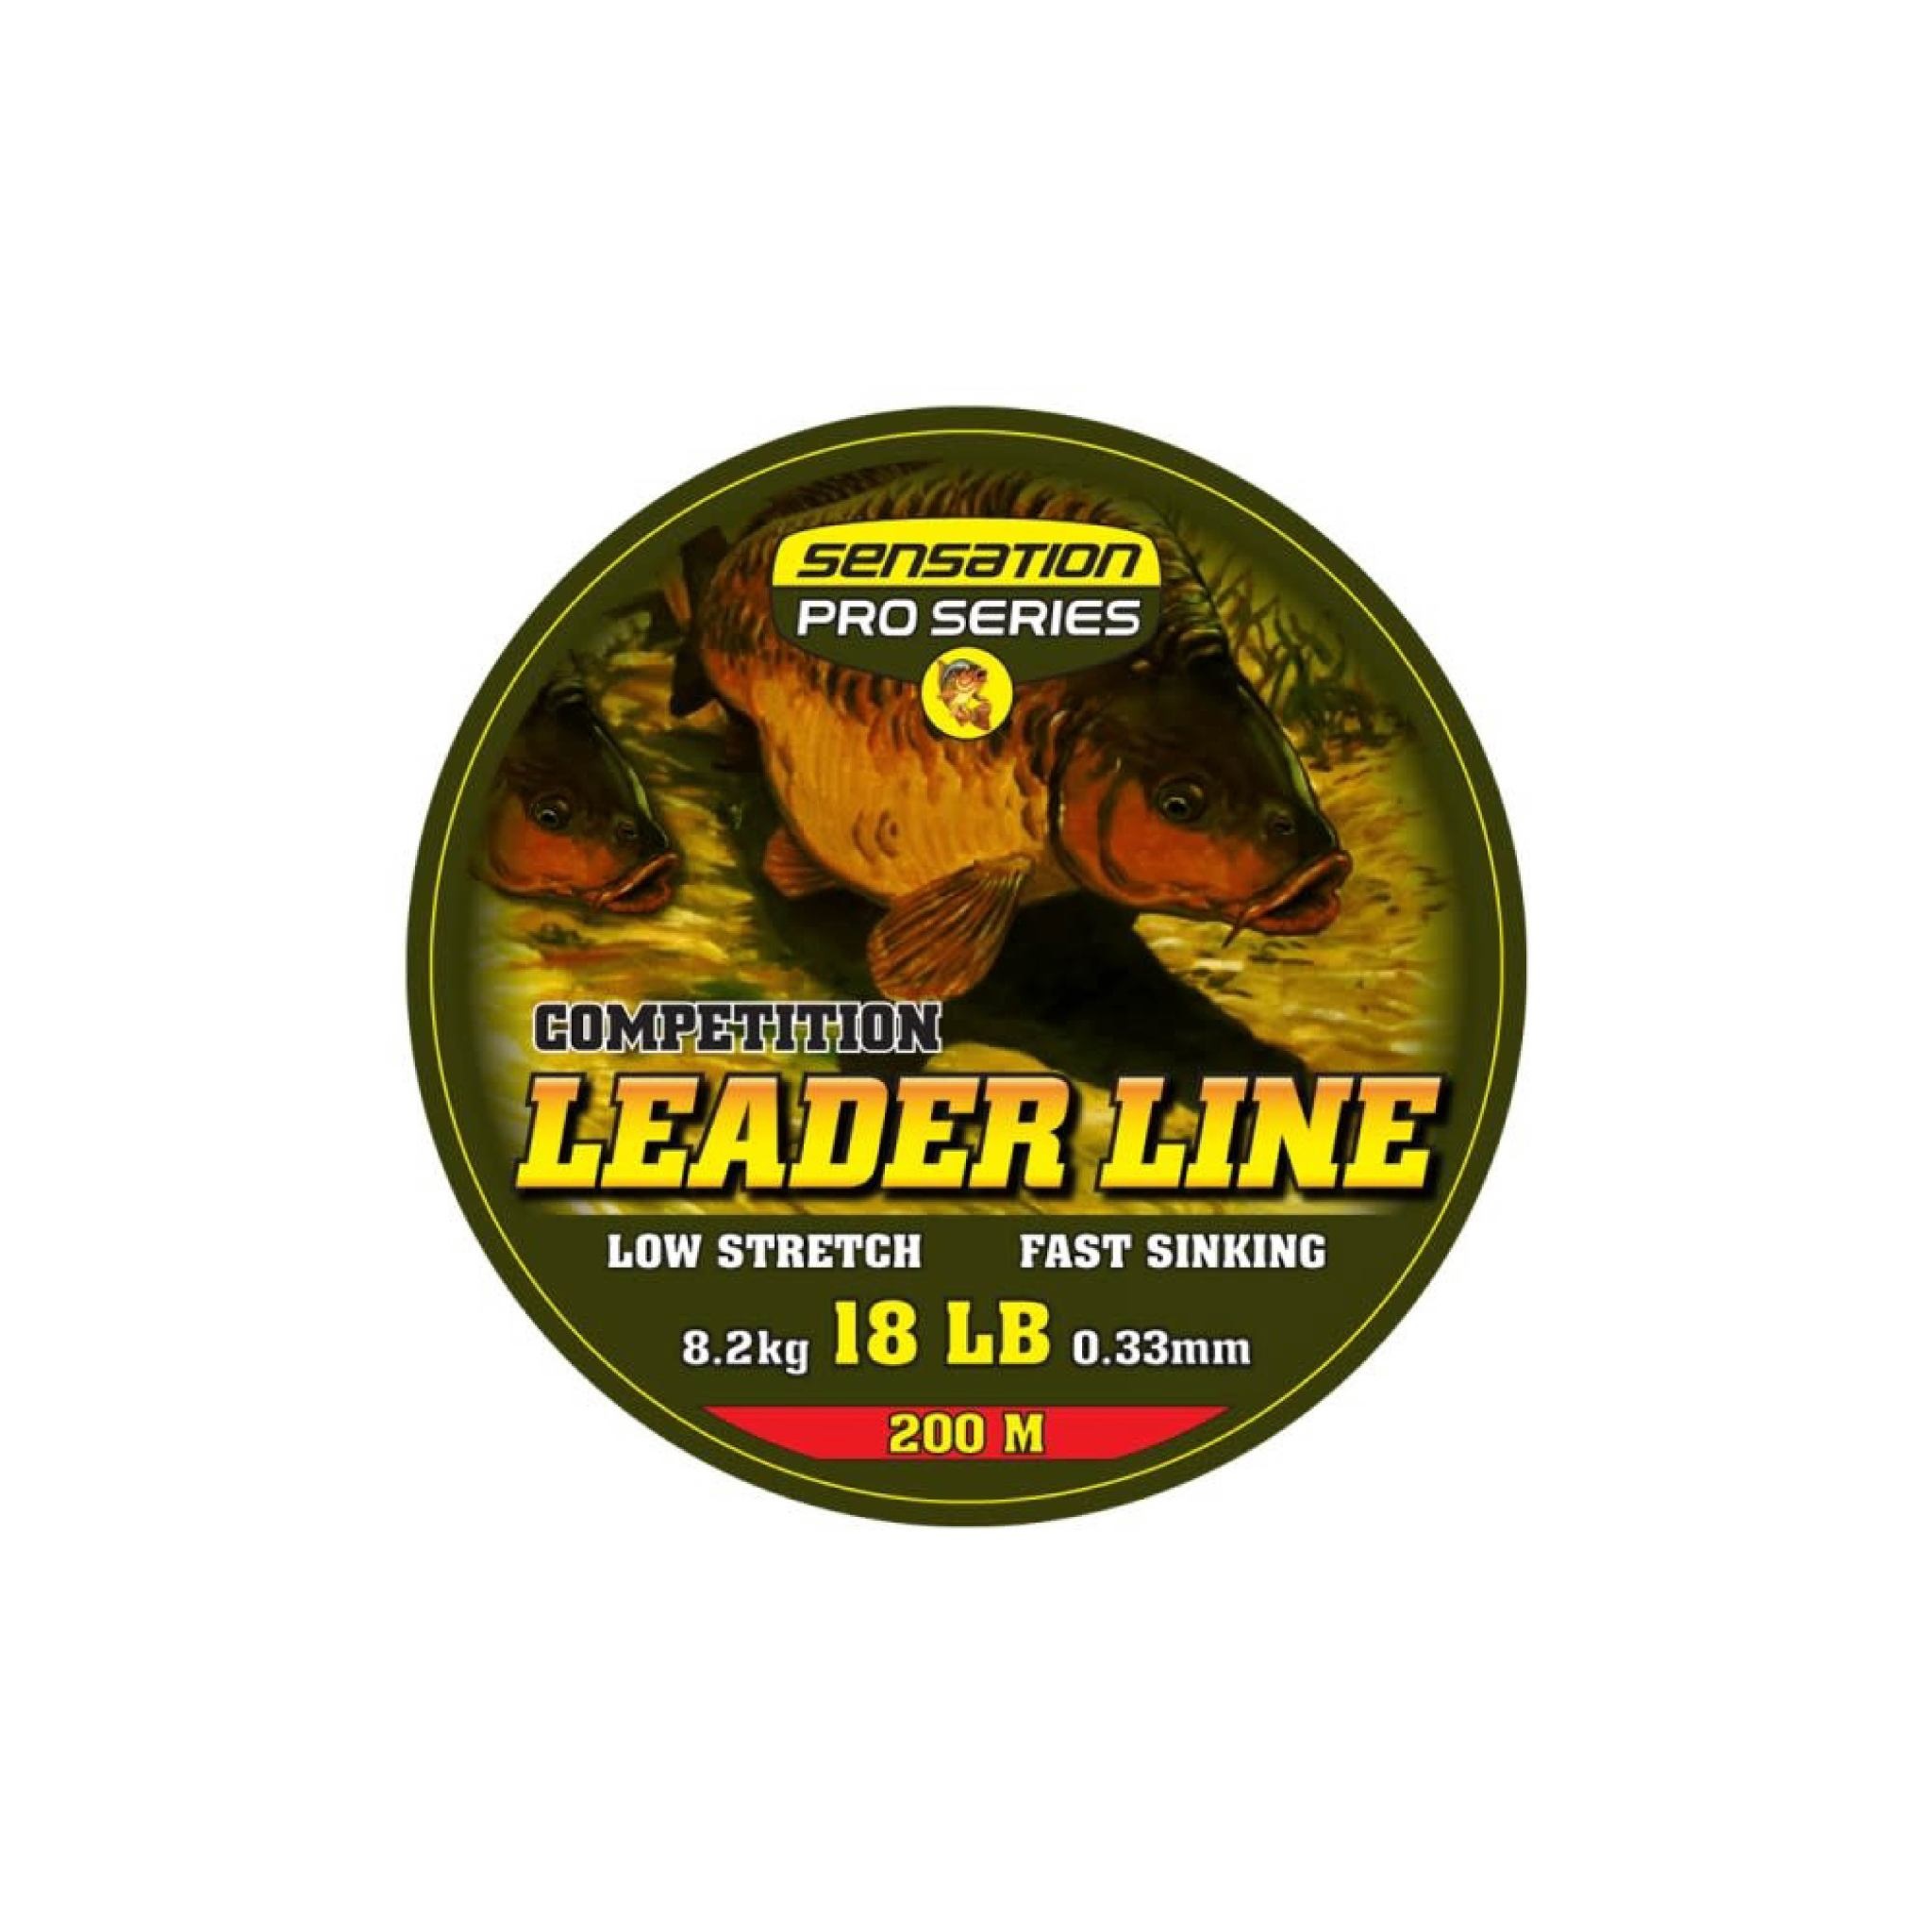 Other (Sensation) LINE P/SERIES LEADER BLACK 200M - Western Accessories  Fishing & Outdoor